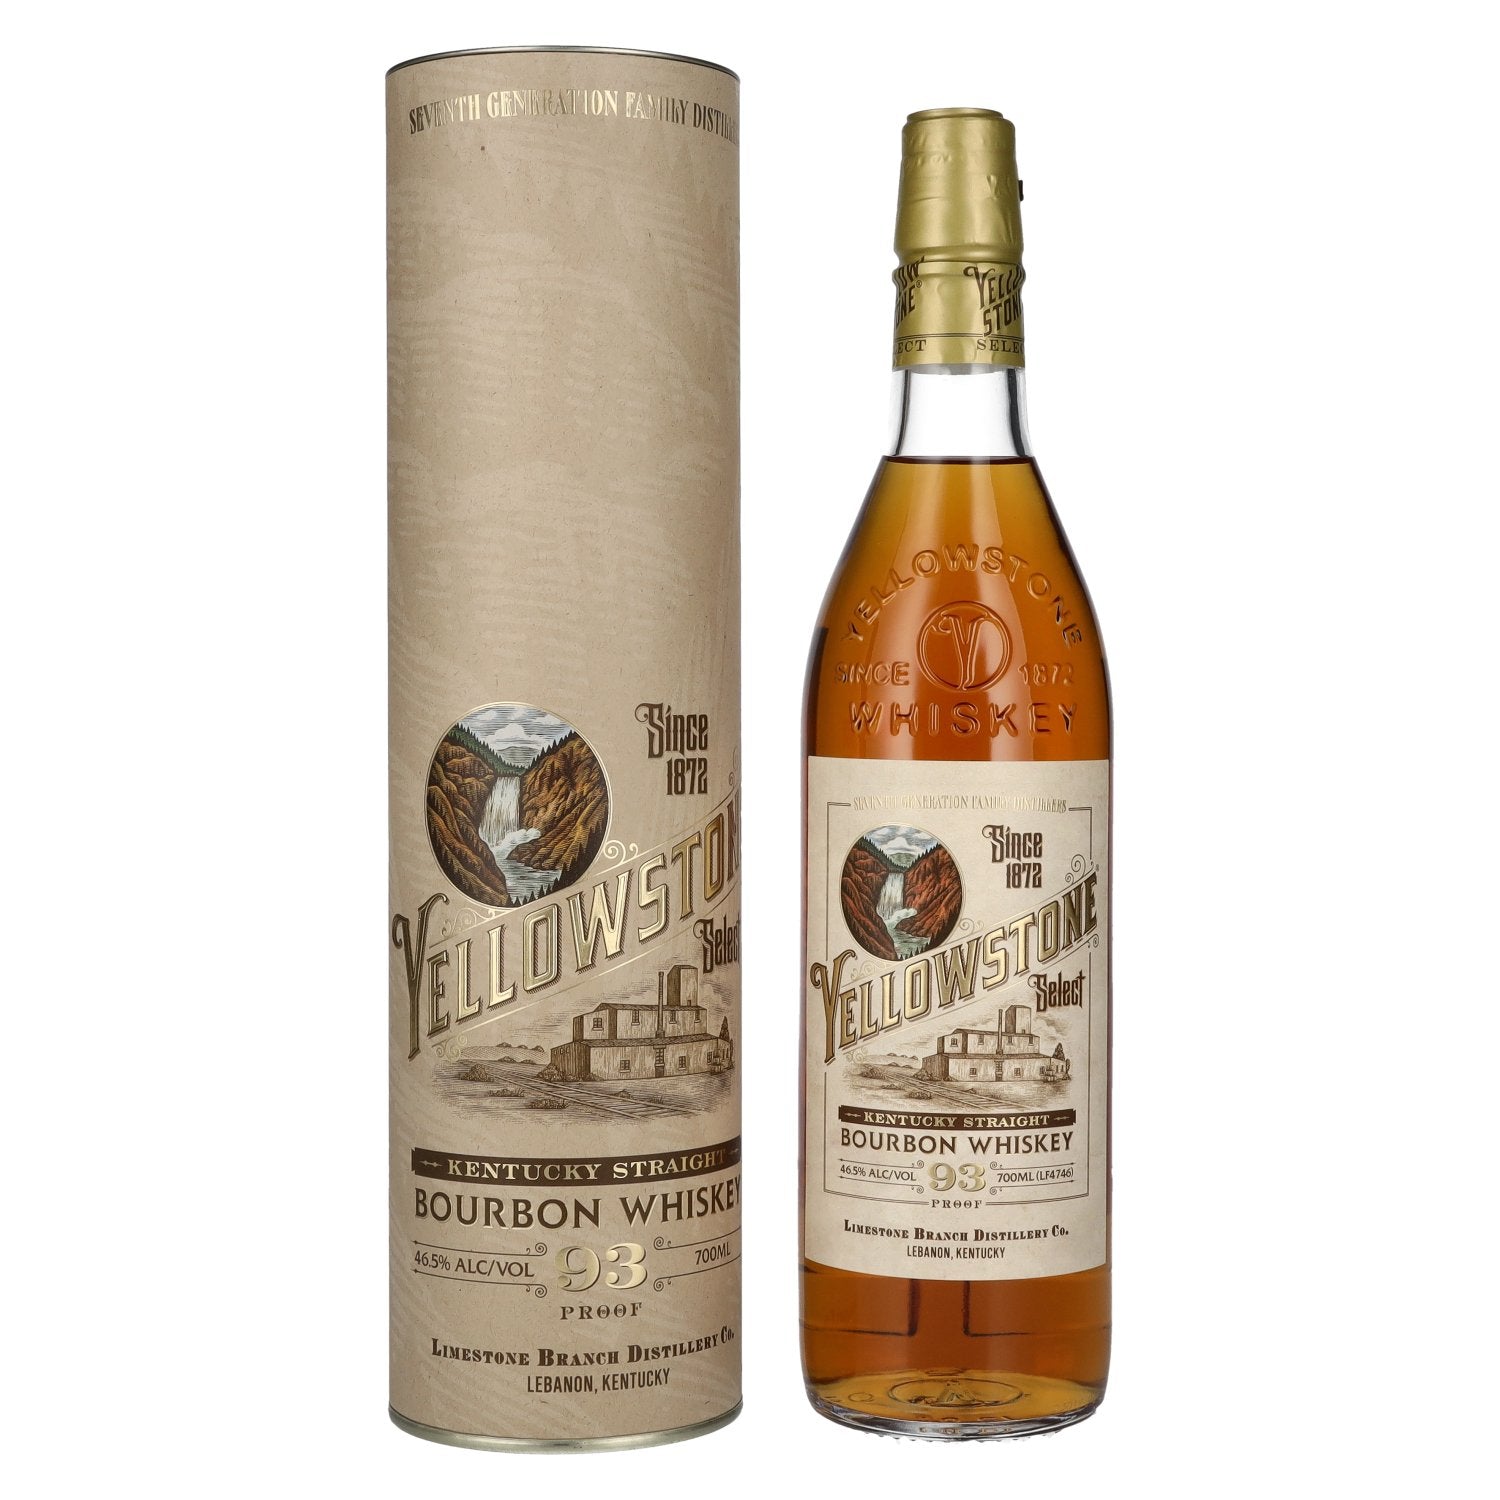 Yellowstone SELECT Kentucky Straight Bourbon Whiskey 46,5% Vol. 0,7l in Giftbox